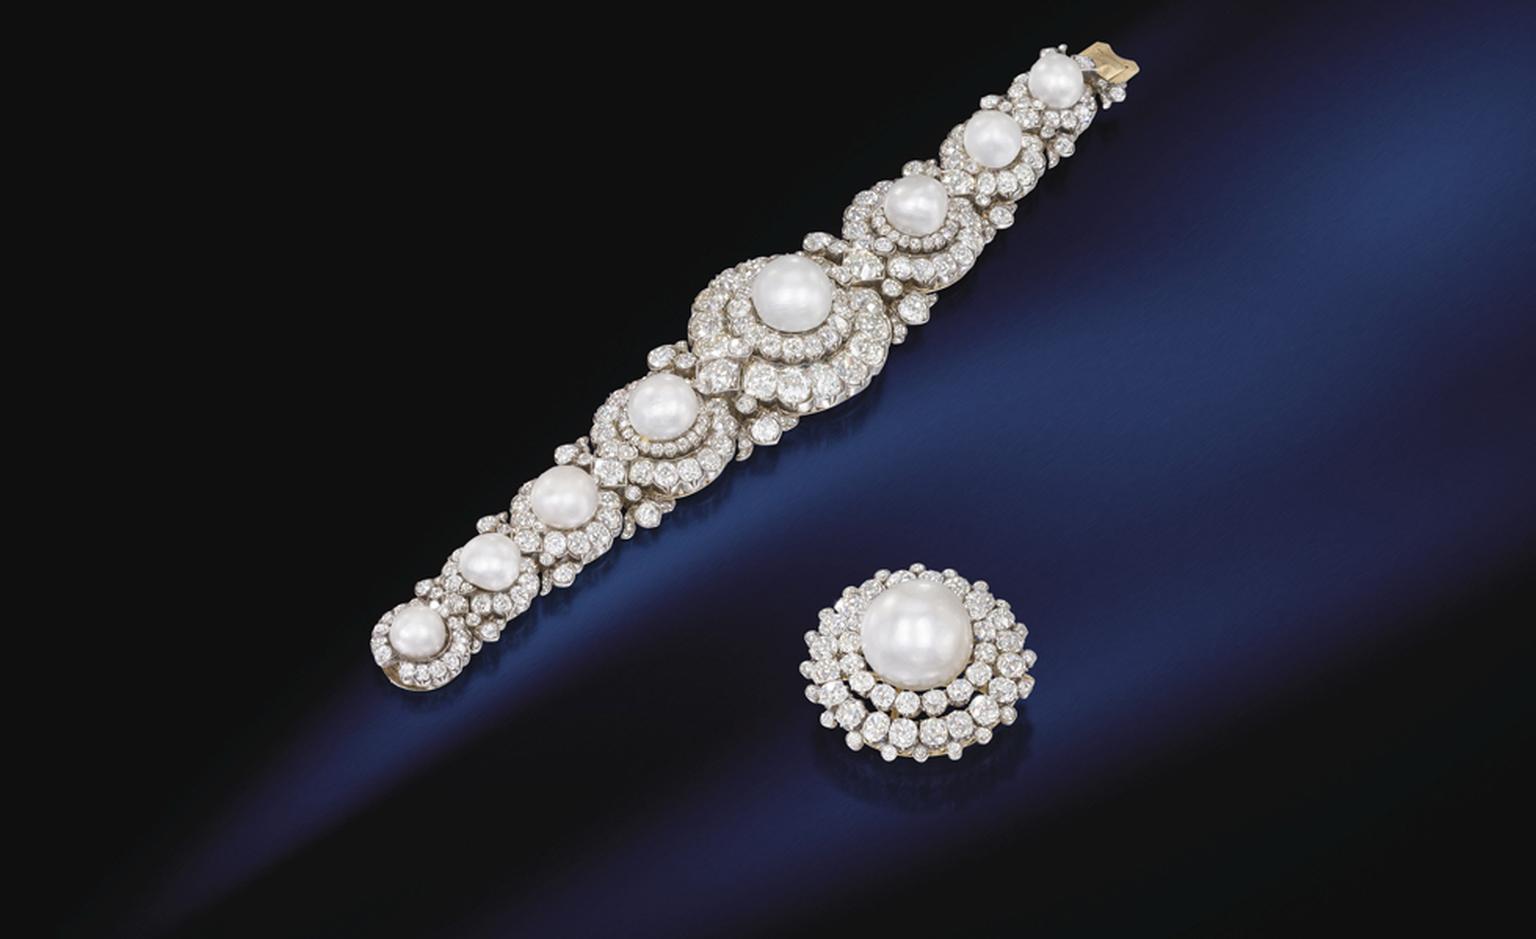 Lot 285. An historic pearl and diamond bracelet and brooch. Estimate £300,000 - £400,000. SOLD FOR £577,250